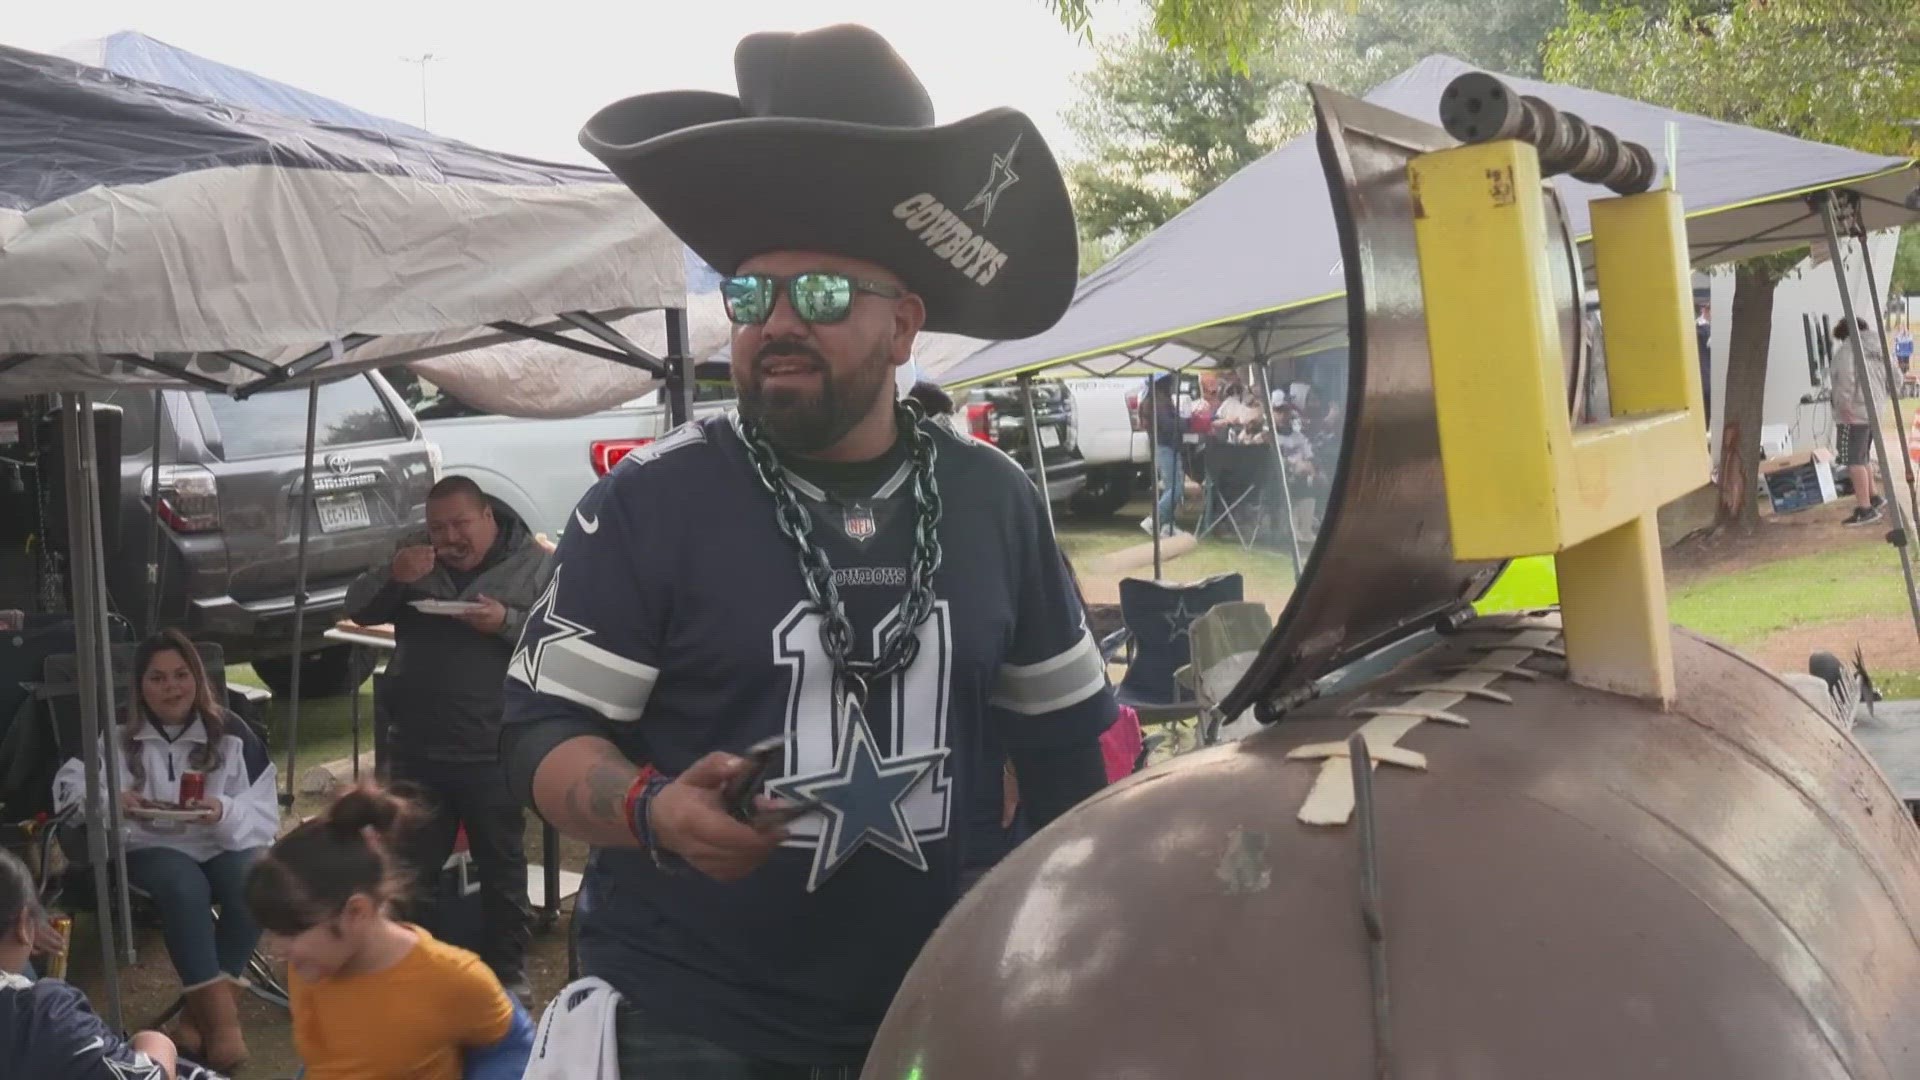 Cowboys fans ditched conventional Thanksgiving feasts for Cowboys tailgating on Thursday.